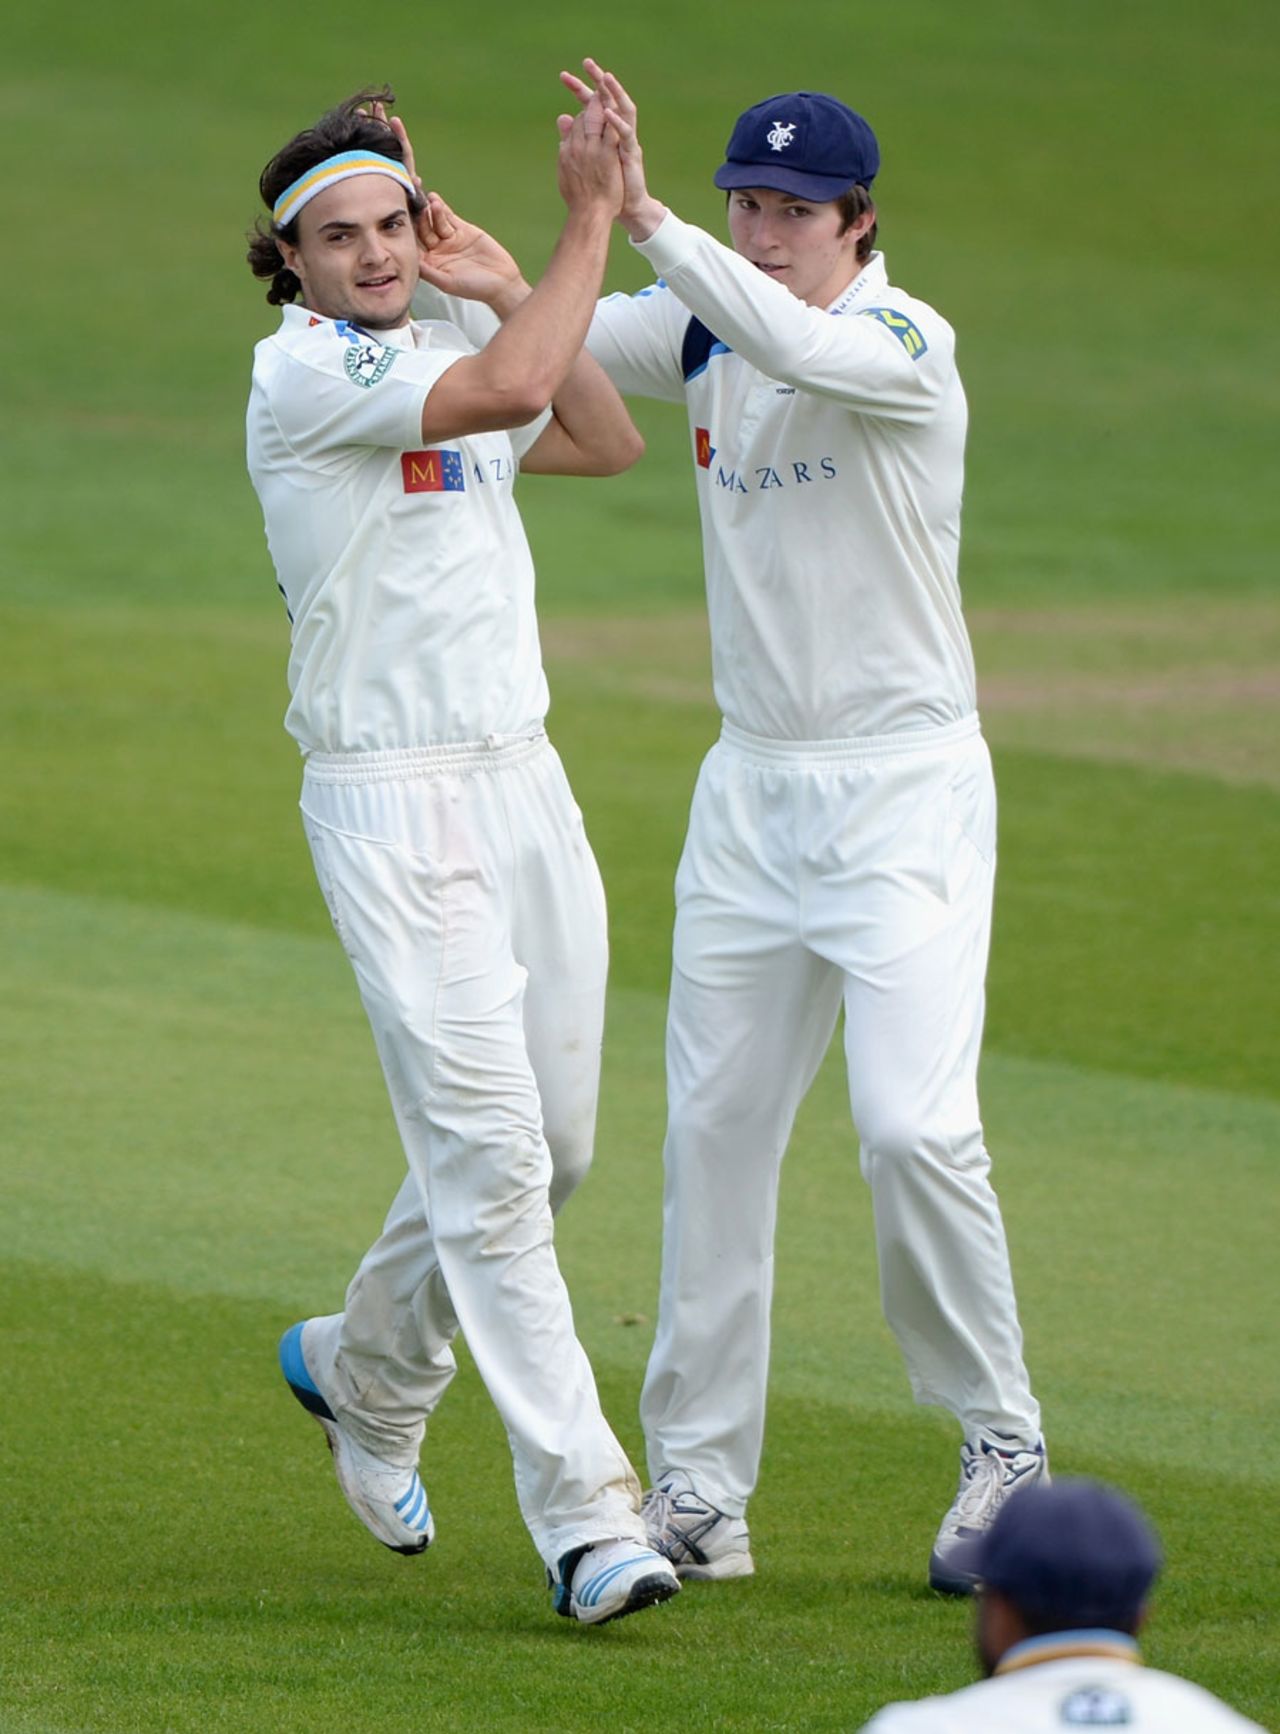 Jack Brooks claimed career-best match figures against his former county, Yorkshire v Northamptonshire, County Championship, Division One, Headingley, 4th day, April 23, 2014